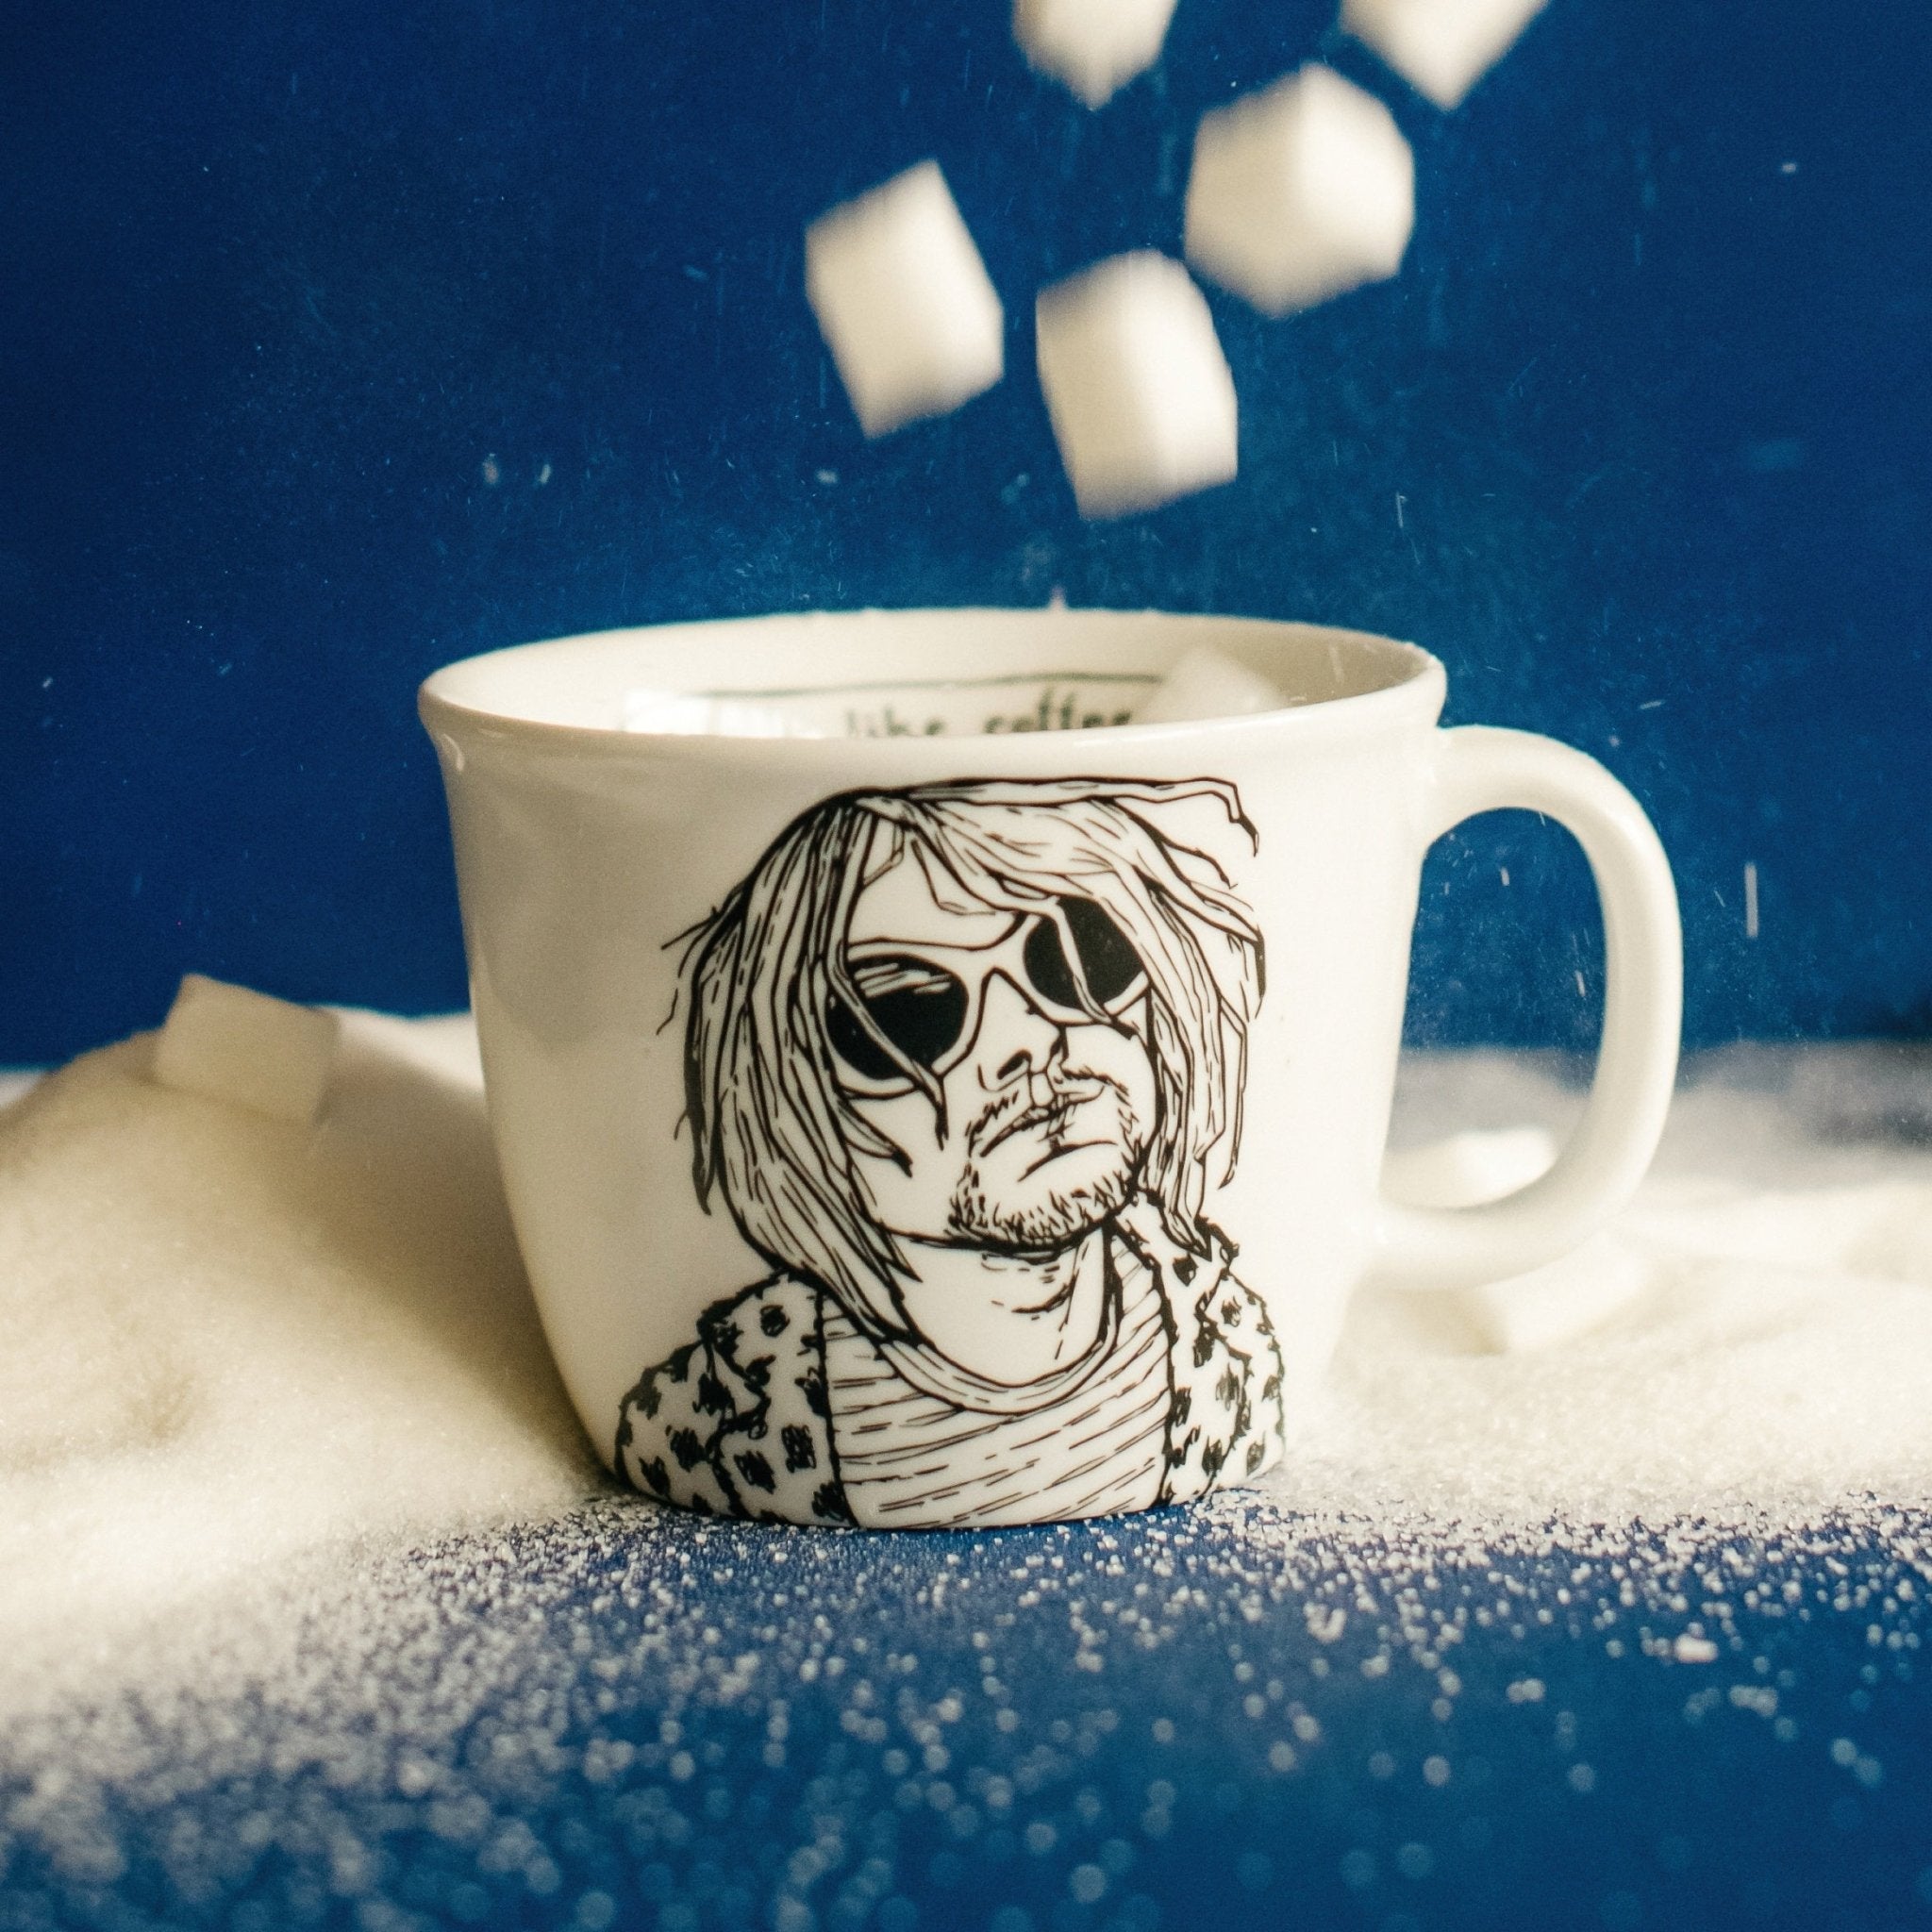 Porcelain cup inspired by Kurt Cobain with sugar